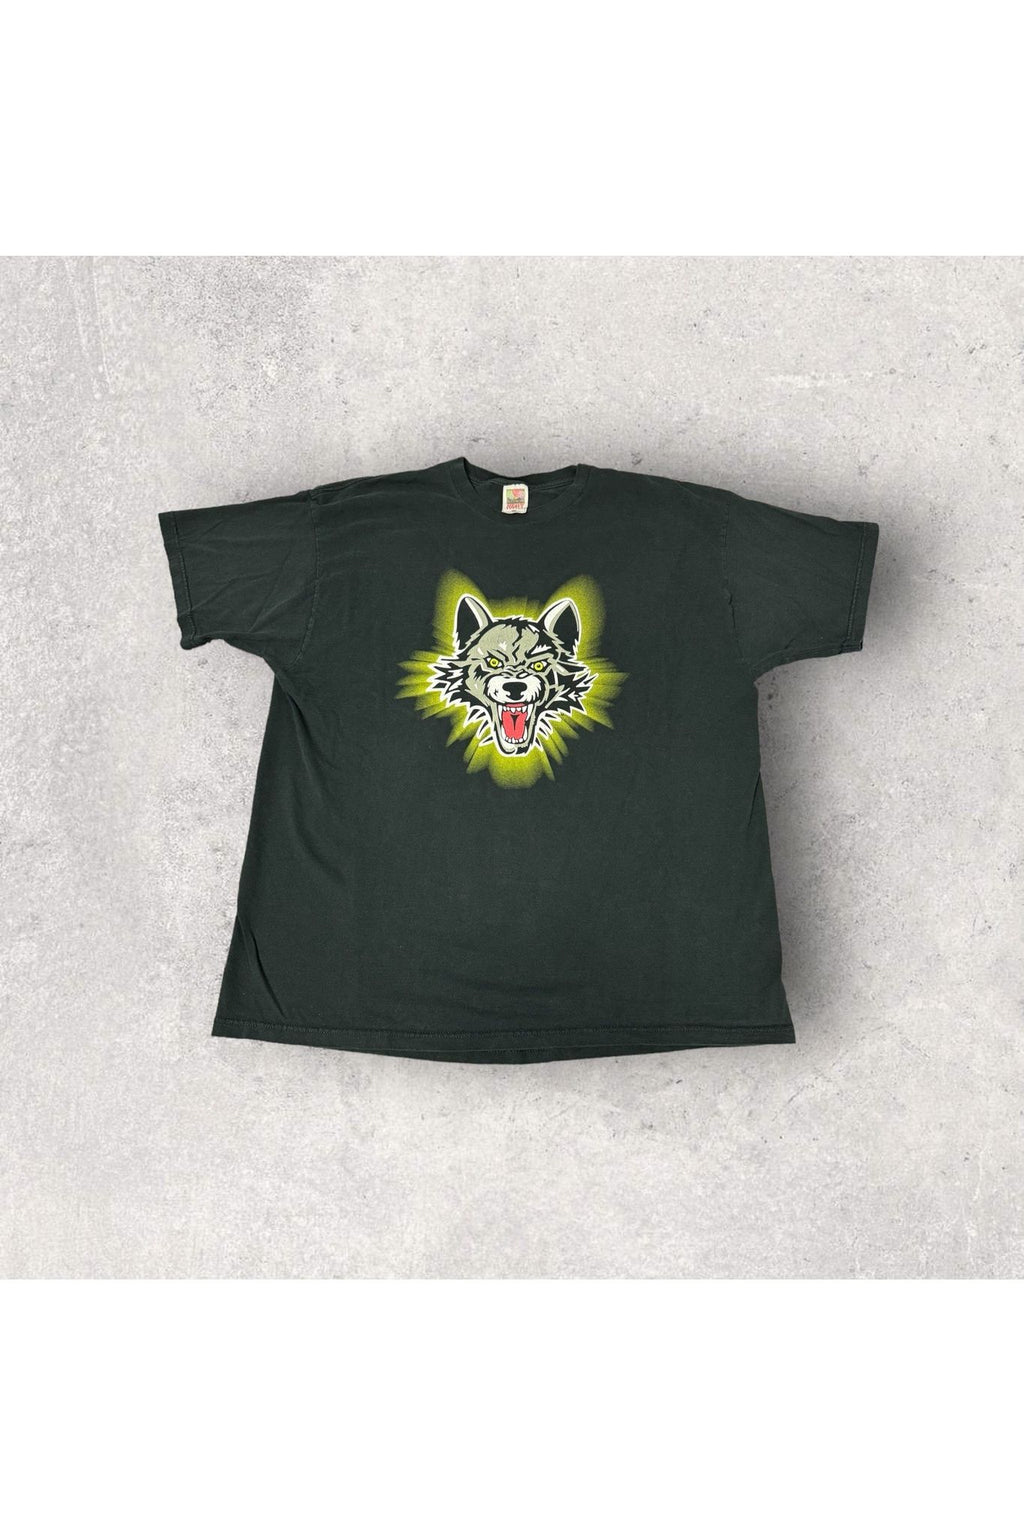 Vintage Chicago Wolves Pro Hockey These Guys Are Champions Tee- XXL